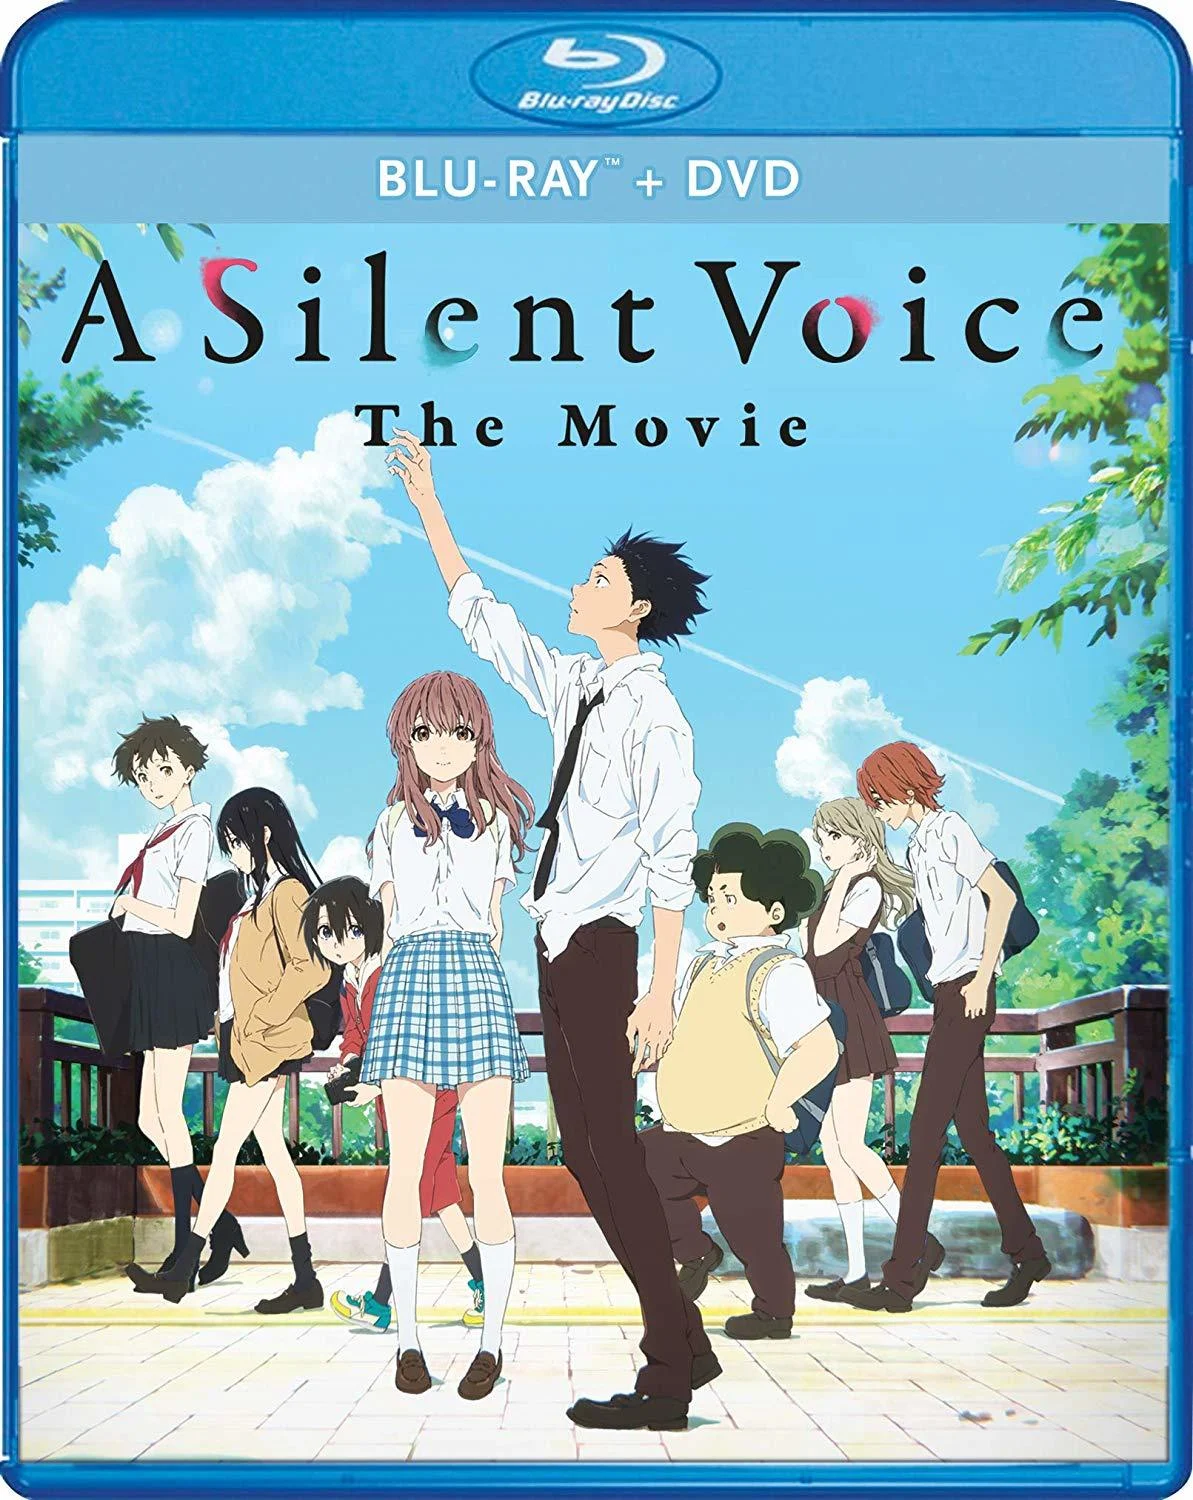 Silent Voice, A (Blu-ray/DVD Combo)